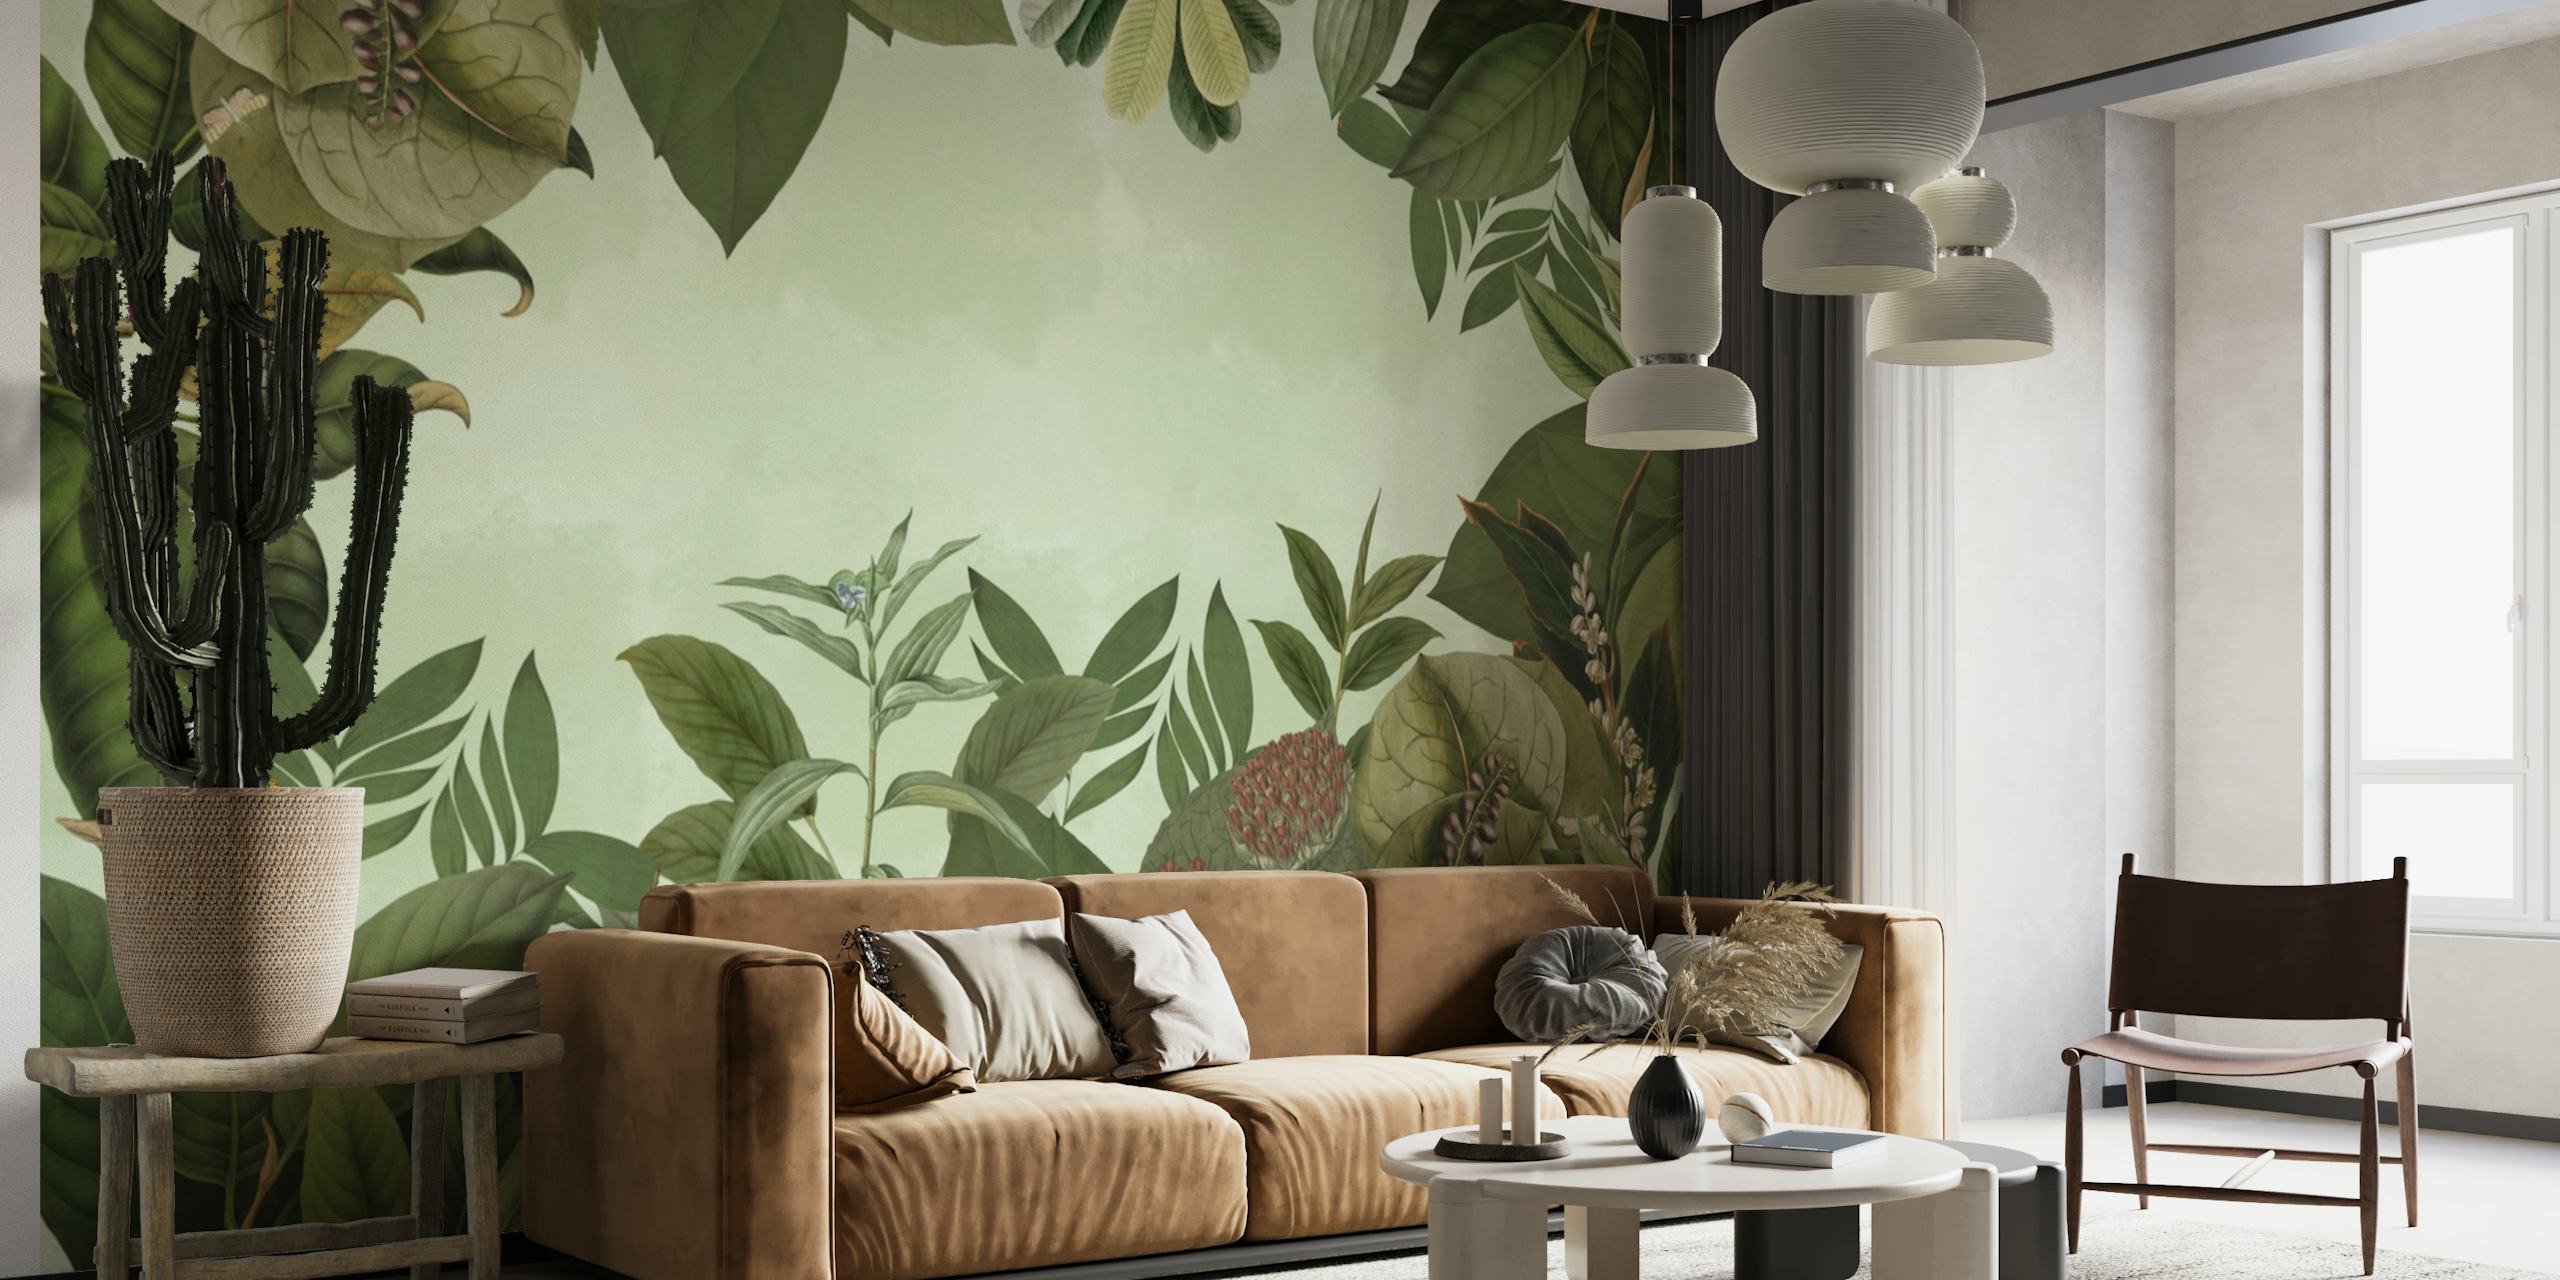 Timeless botanical vintage garden wall mural with lush foliage